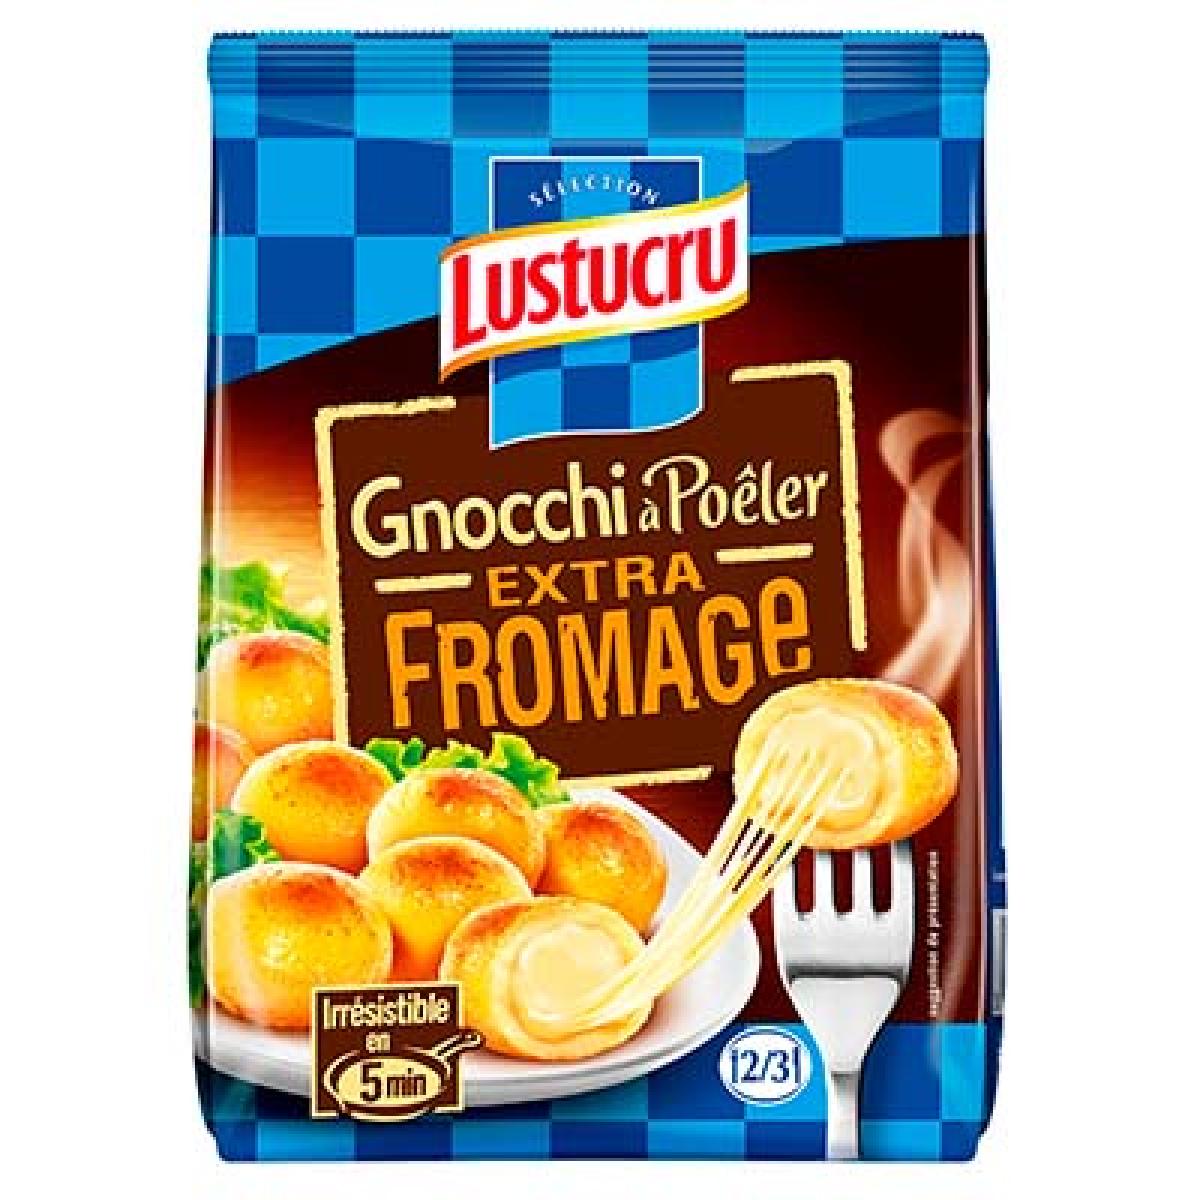 GNOCCI.A POELER FROMA.280